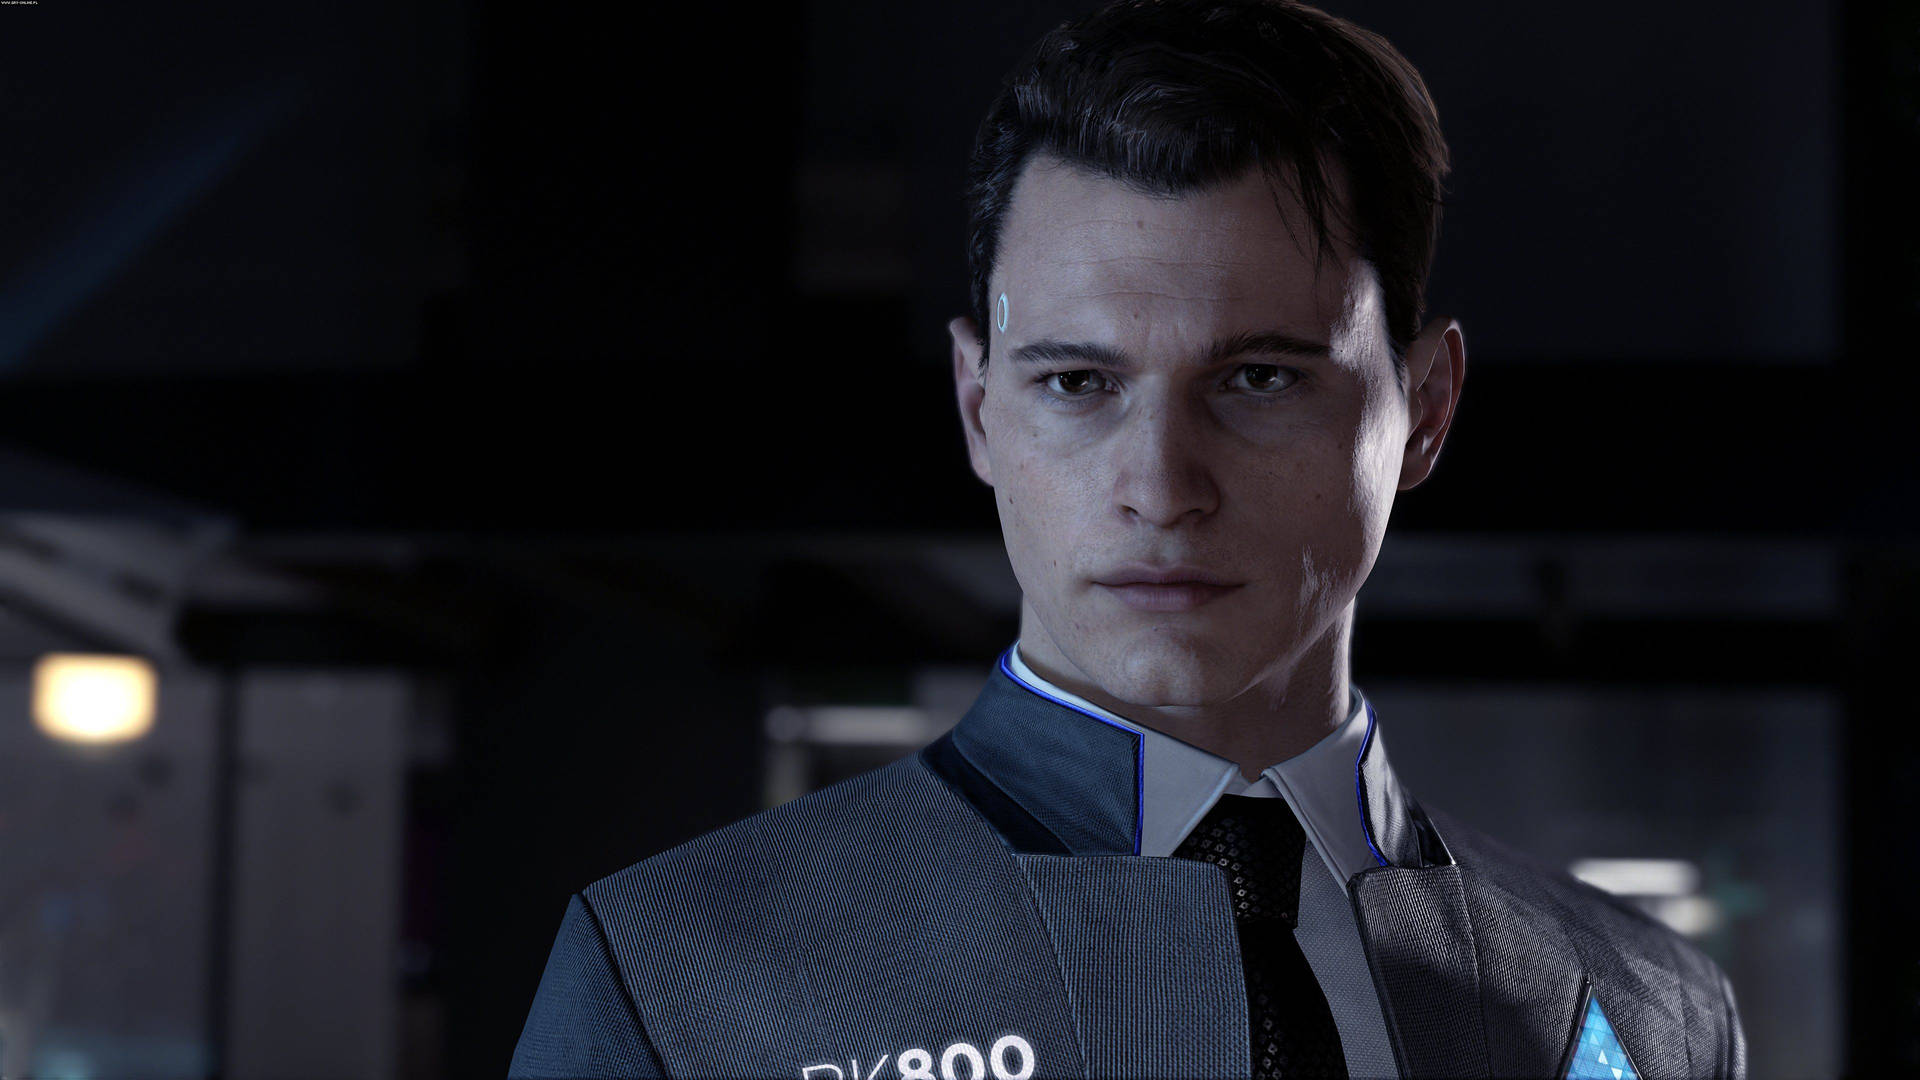 Detroit Become Human 3840X2160 Wallpaper and Background Image